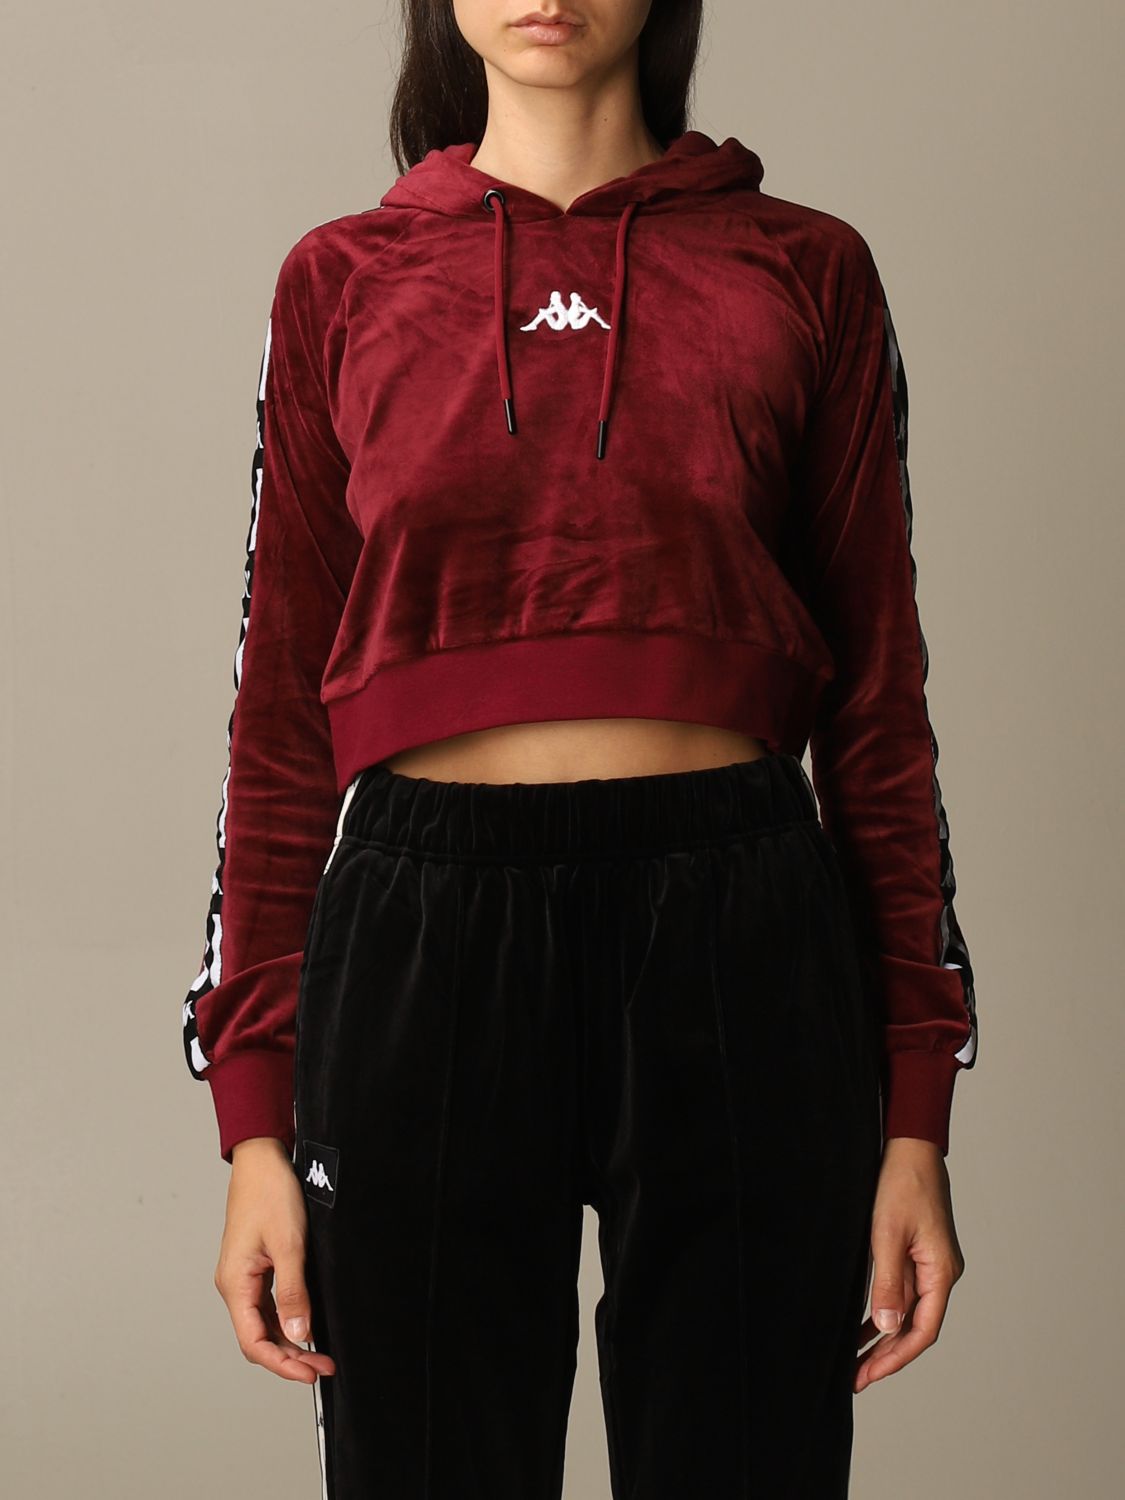 Kappa Outlet: Authentic USA cropped sweatshirt with logo - Burgundy | sweatshirt online GIGLIO.COM